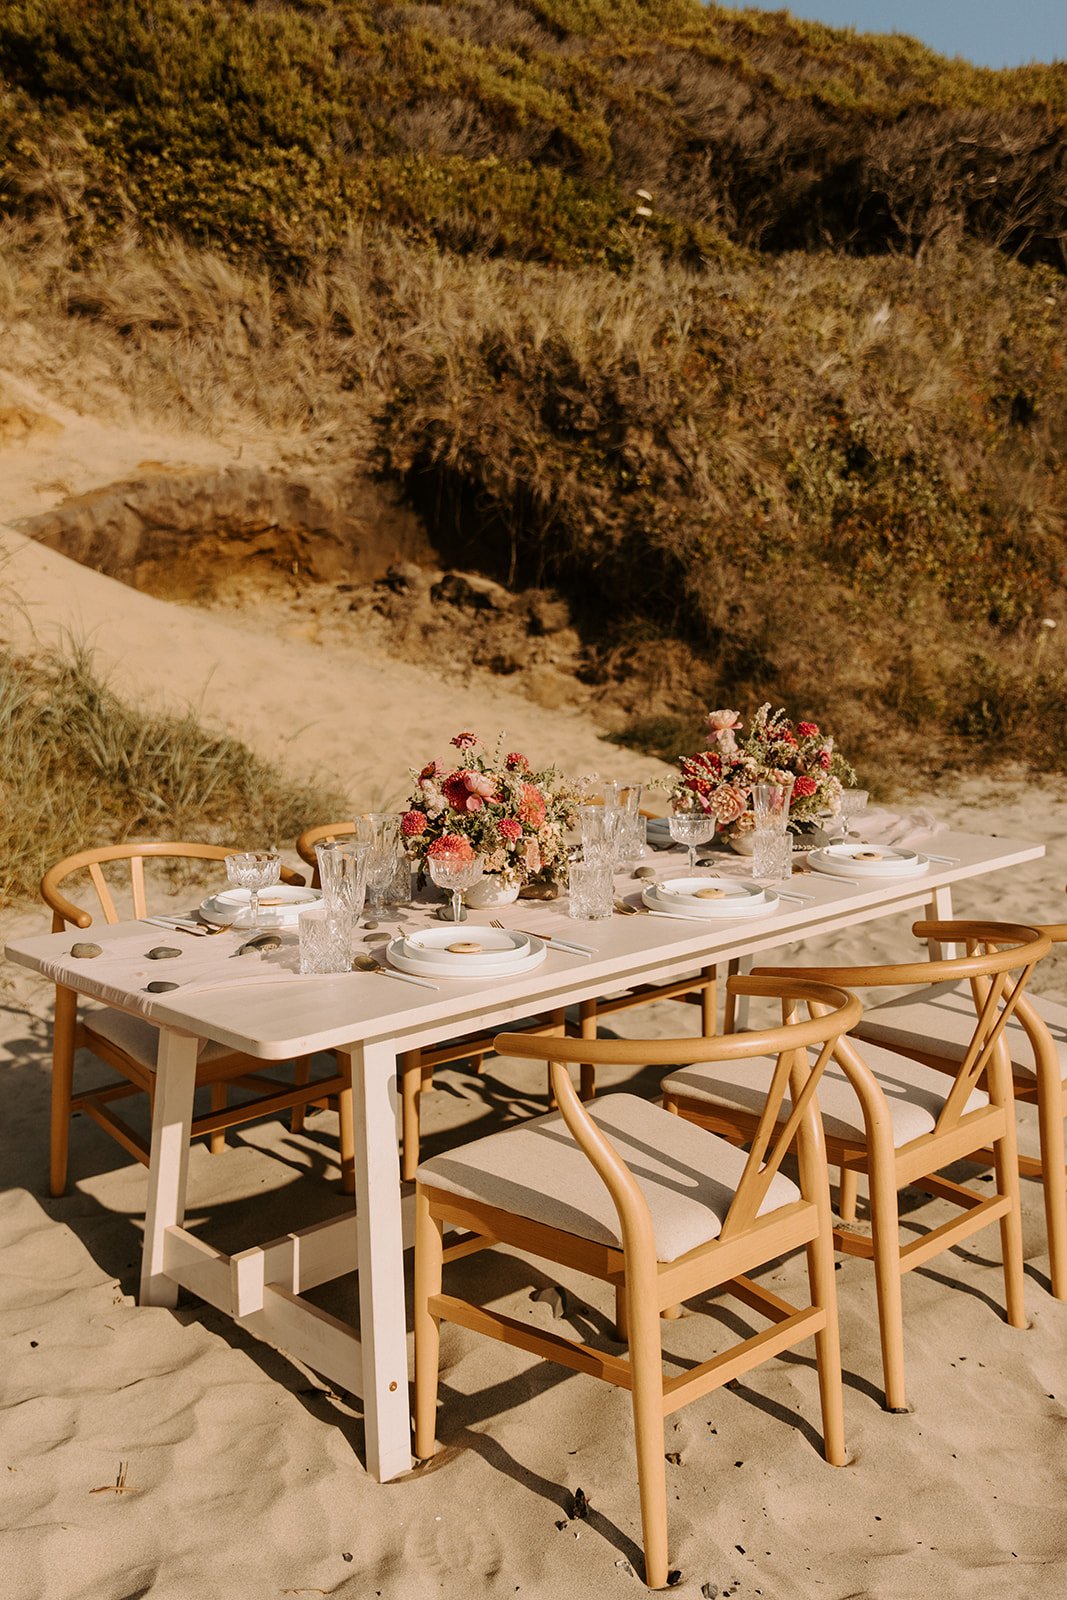 beach boho wedding inspiration featuring wishbone chairs and wild floral arrangements